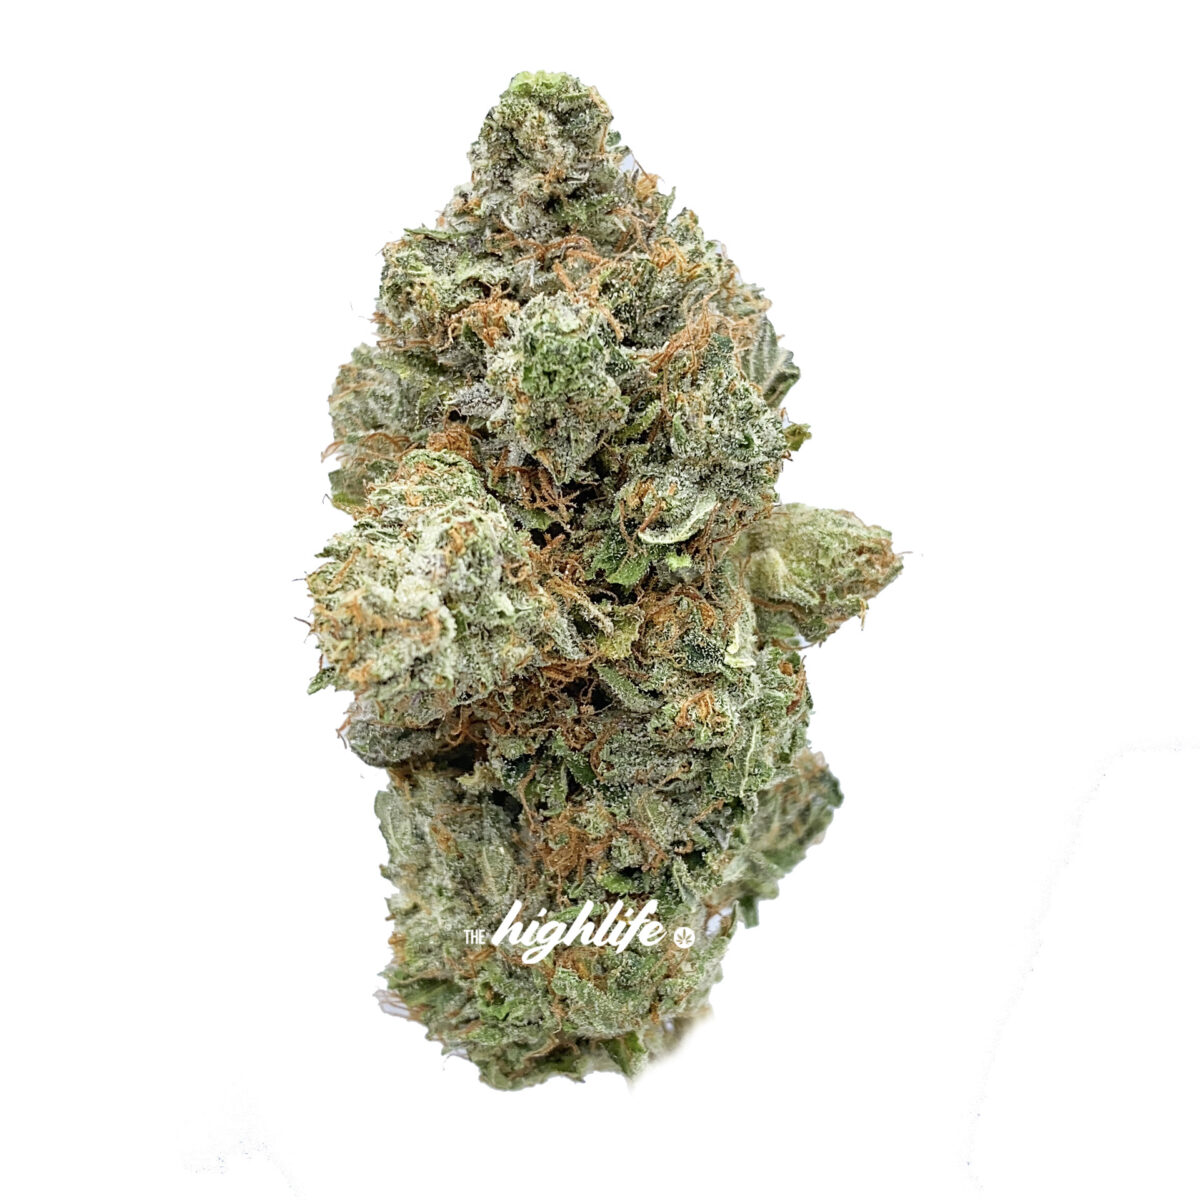 Buy greasy pink in ottawa - same day weed delivery